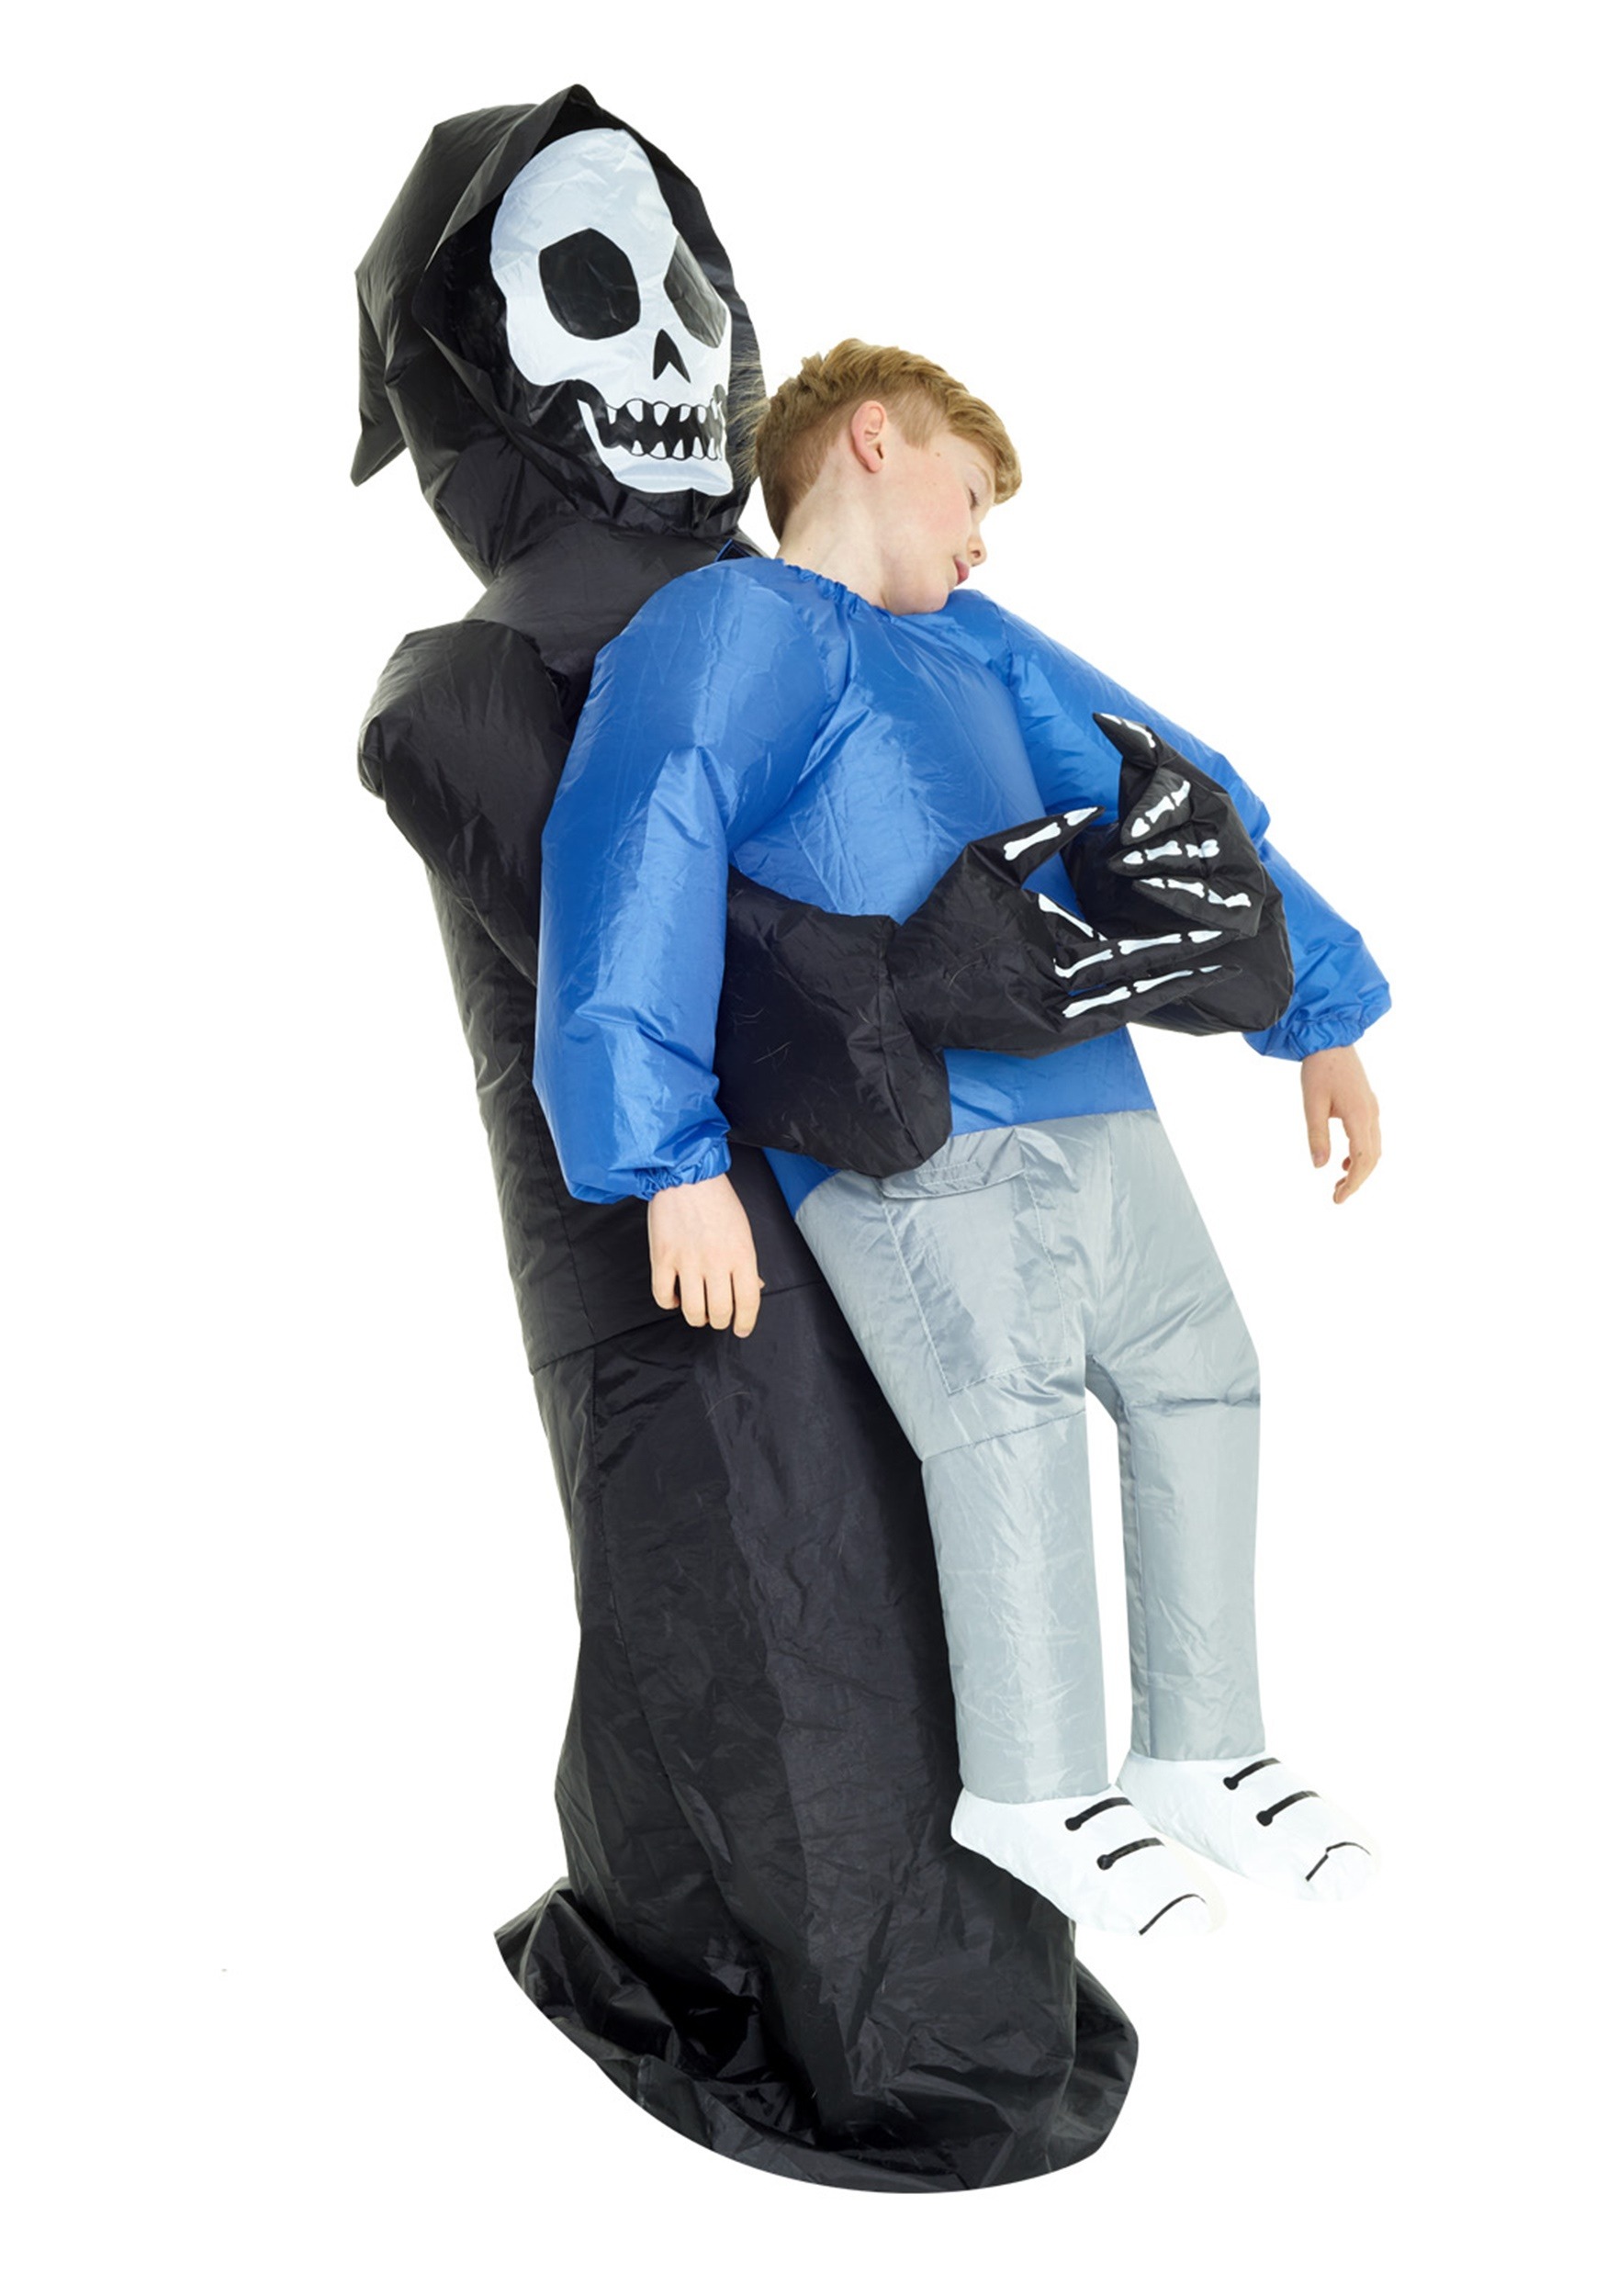 Photos - Fancy Dress UP3D Morphsuits Inflatable Grim Reaper Pick Me Up Costume for Children Black 